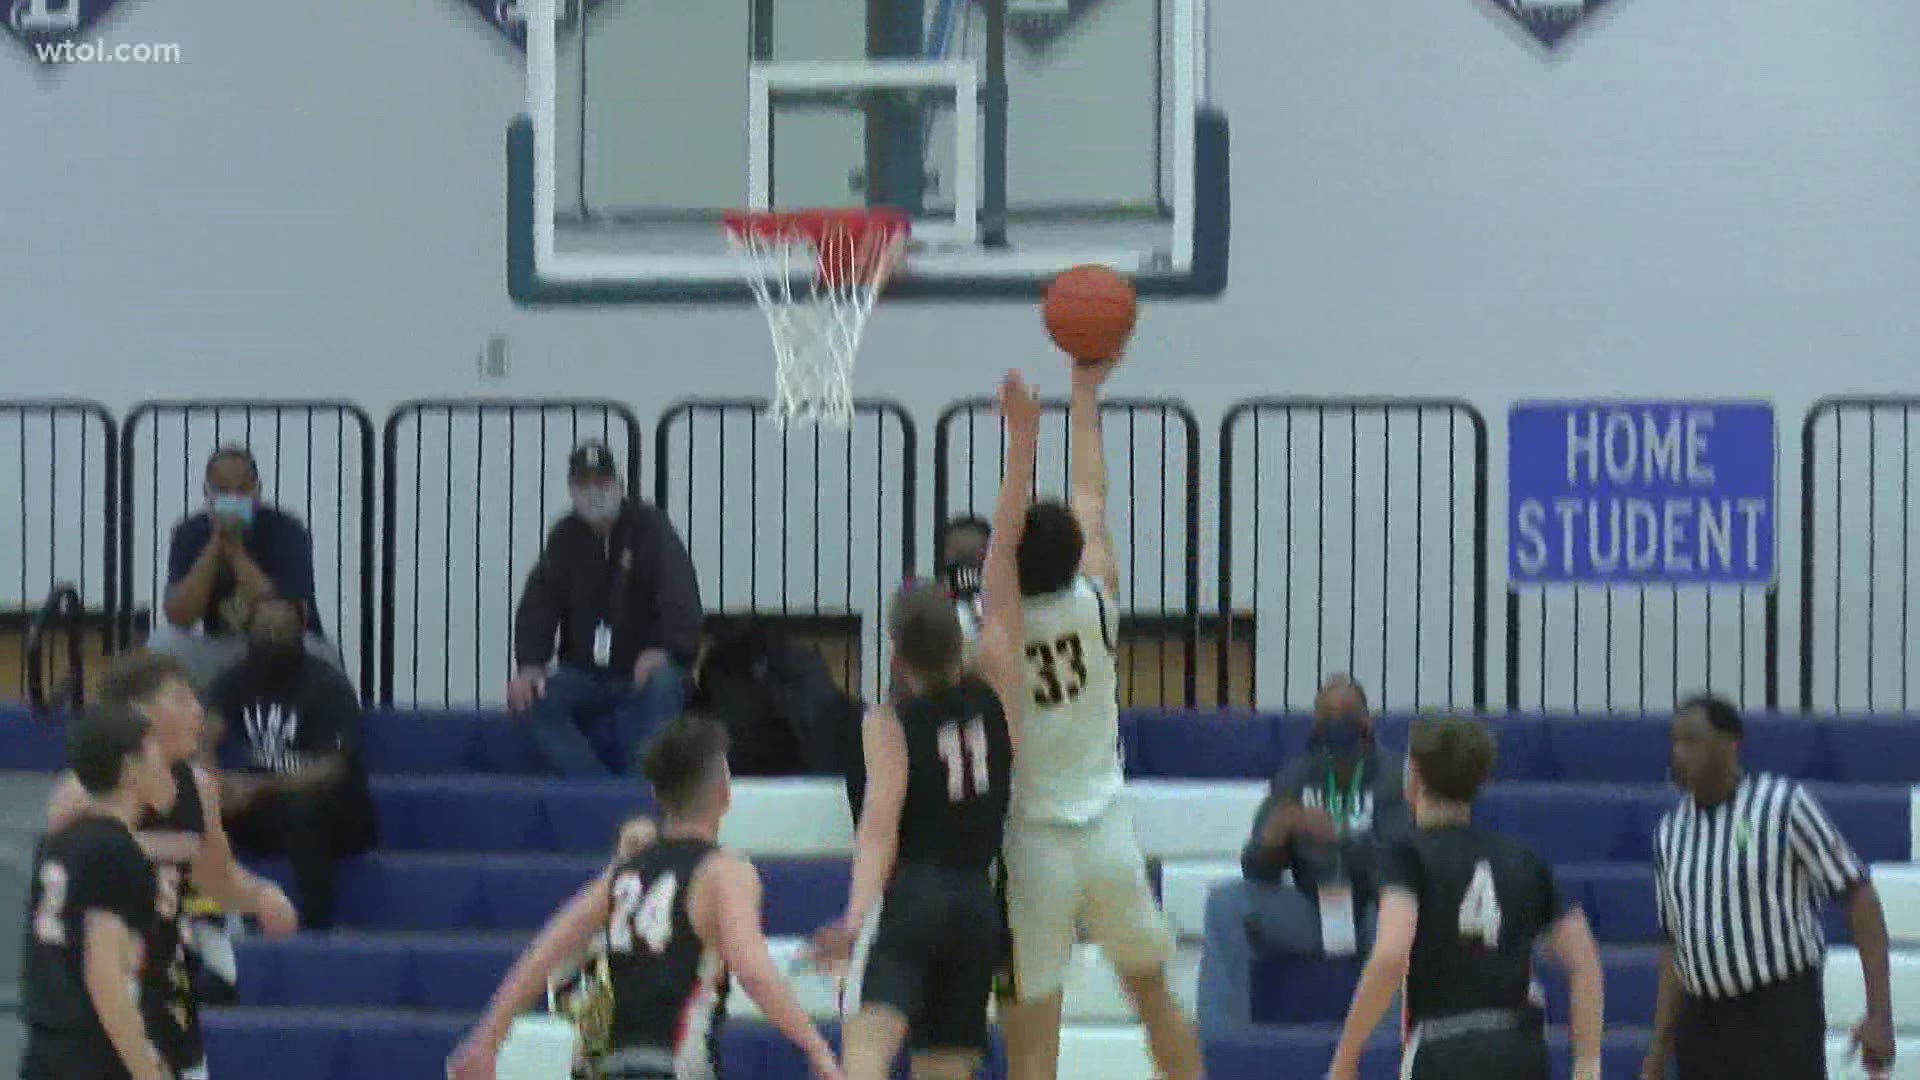 WTOL 11 Sports Director Jordan Strack brings you the highlights from the 2020-21 basketball season as playoffs continue across our area.